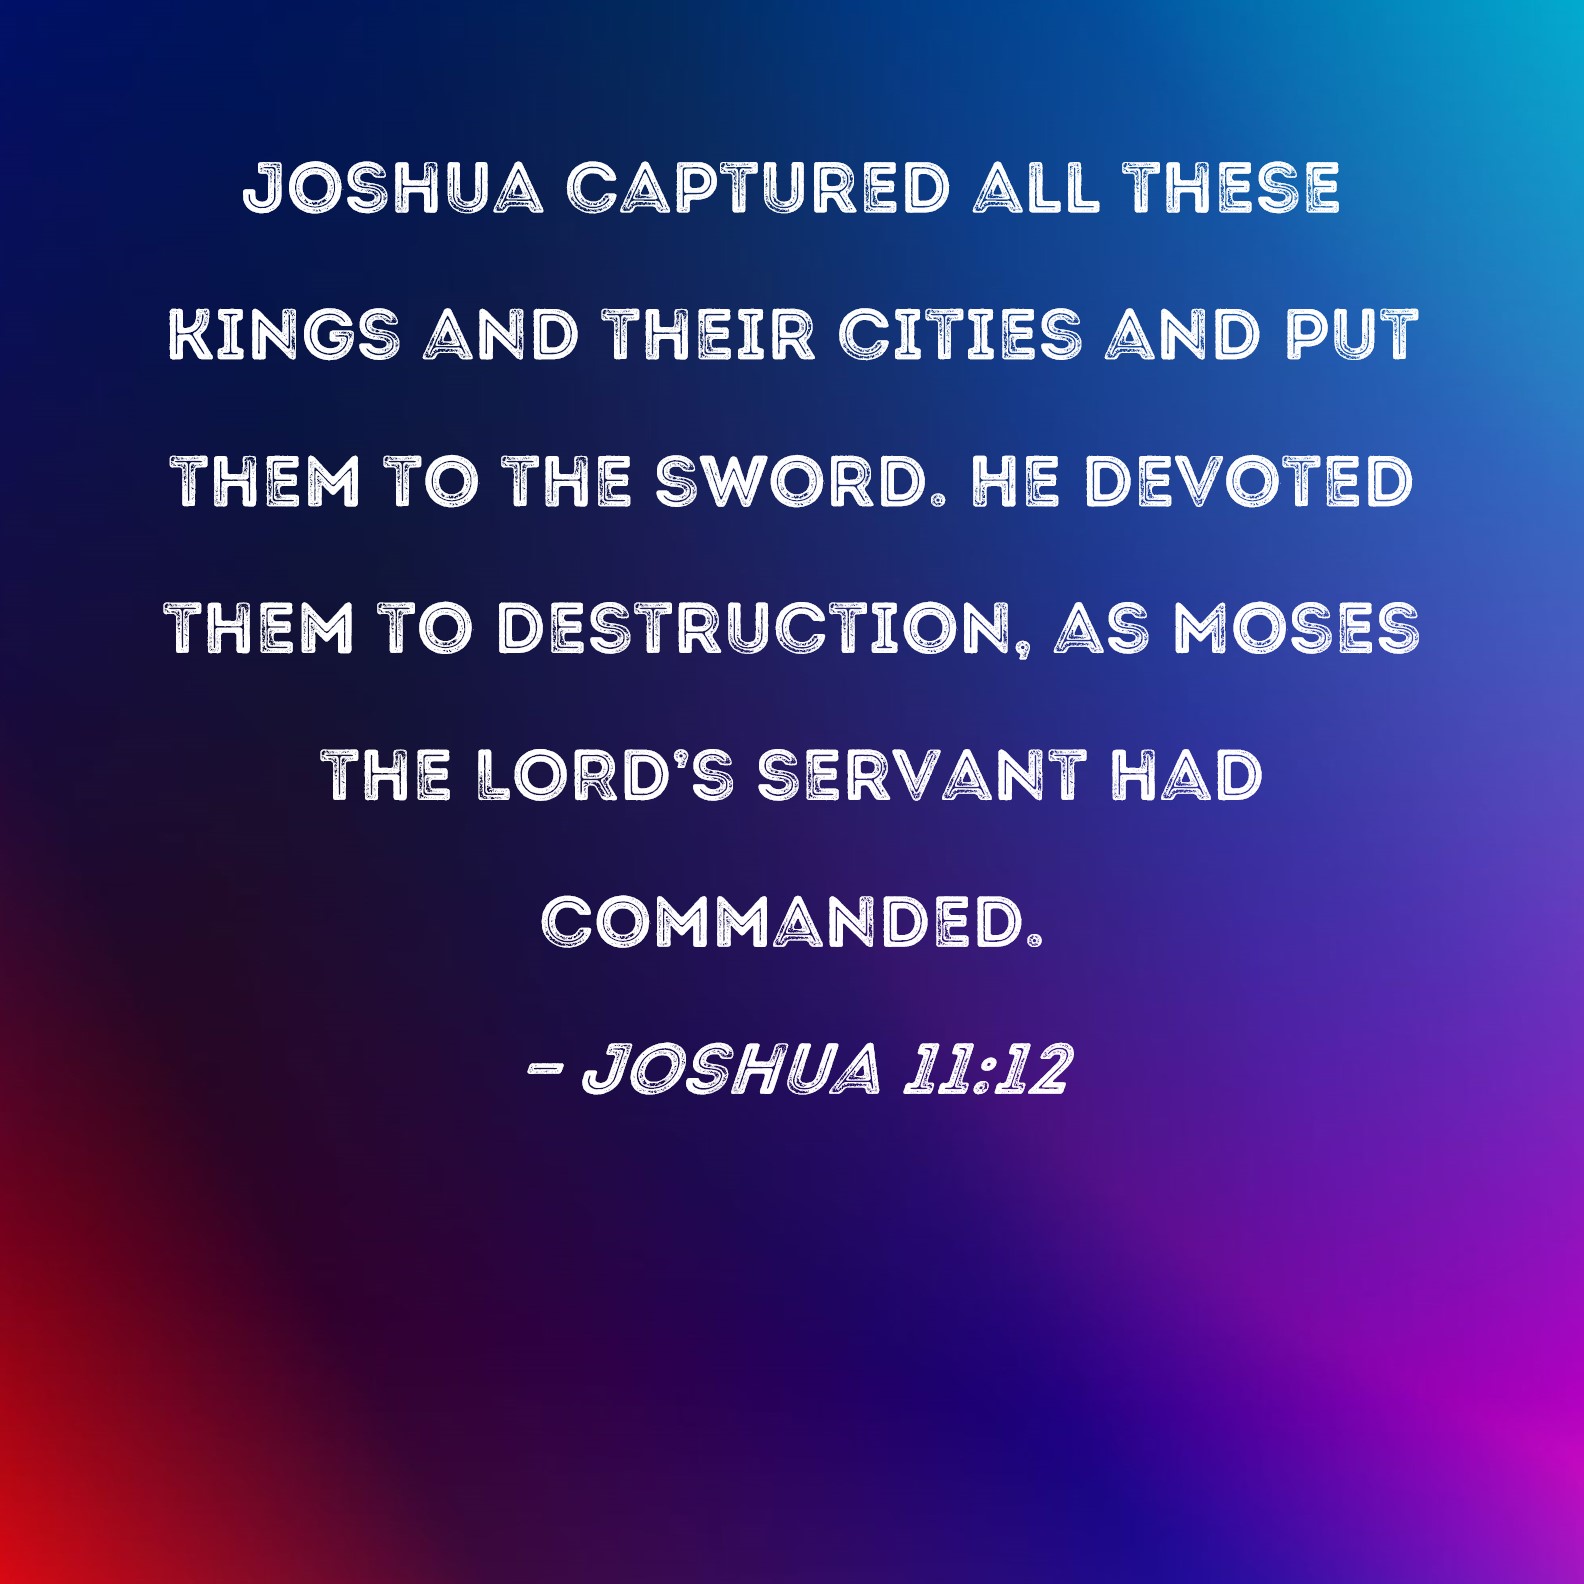 joshua-11-12-joshua-captured-all-these-kings-and-their-cities-and-put